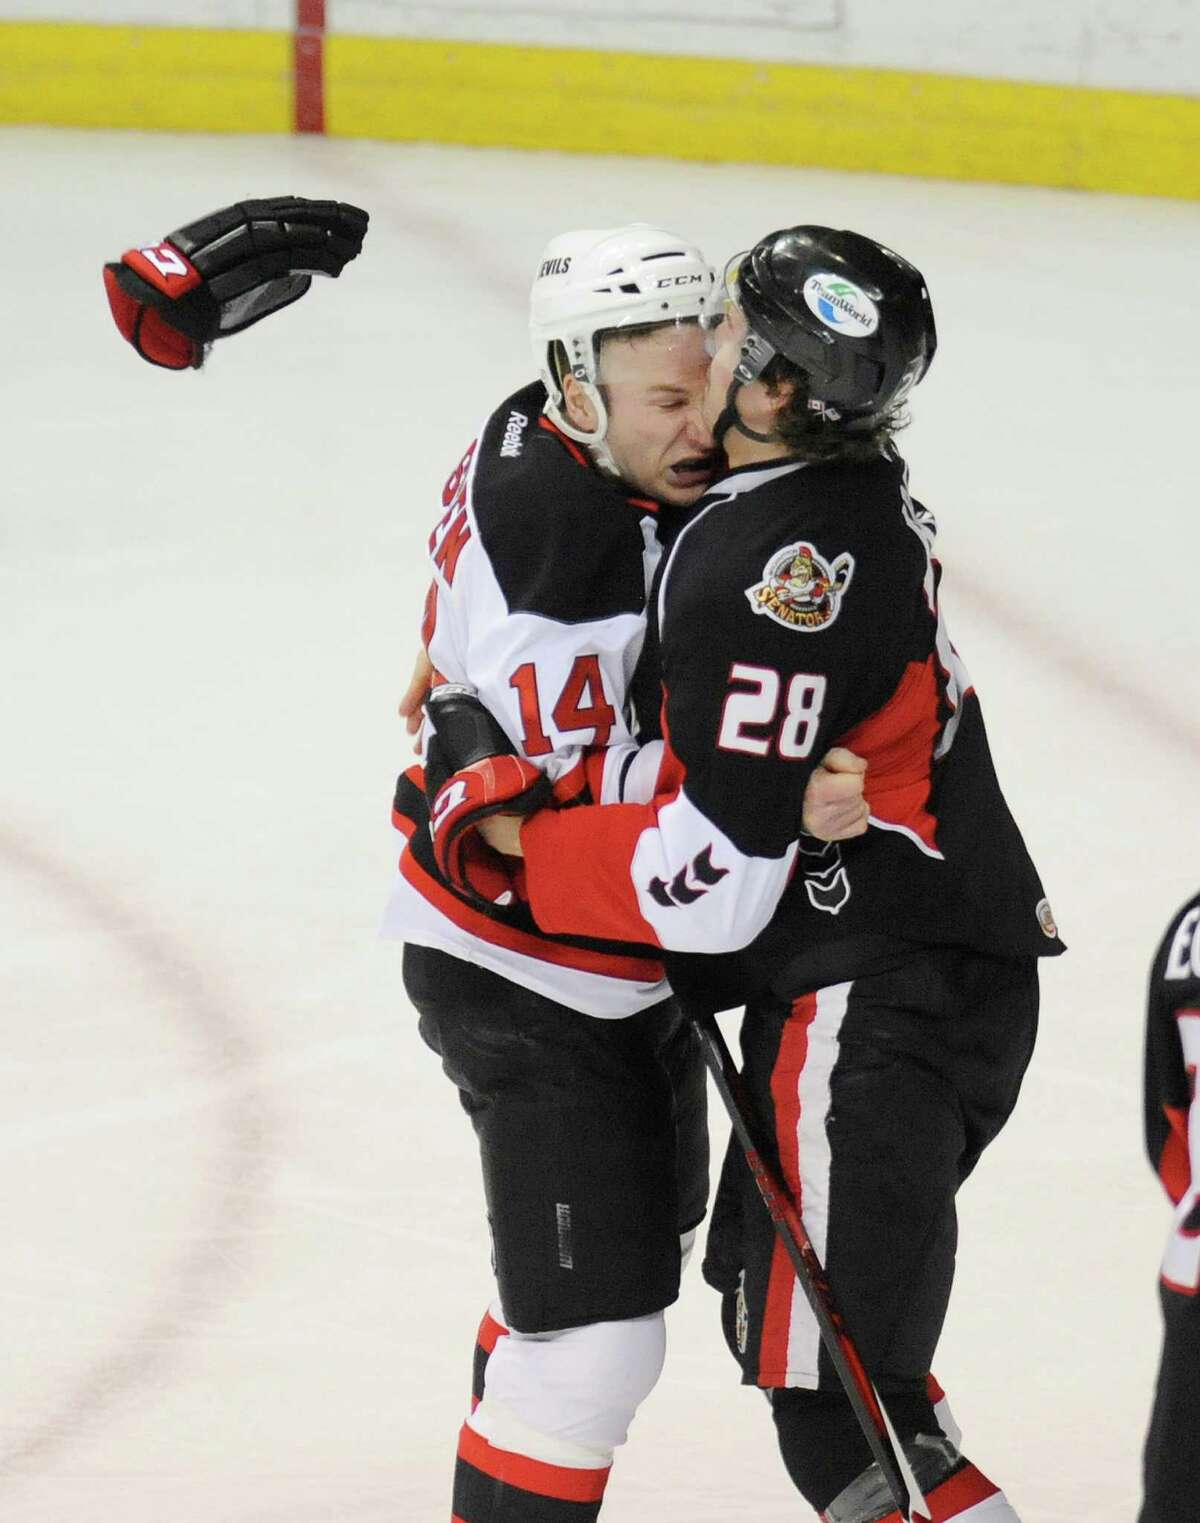 Binghamton Senators' Darren Kramer (28) and Albany Devils' Cam Janssen (14) fight during the first period of an AHL hockey game in Albany, N.Y., Saturday, April 13, 2013. (Hans Pennink / Special to the Times Union)